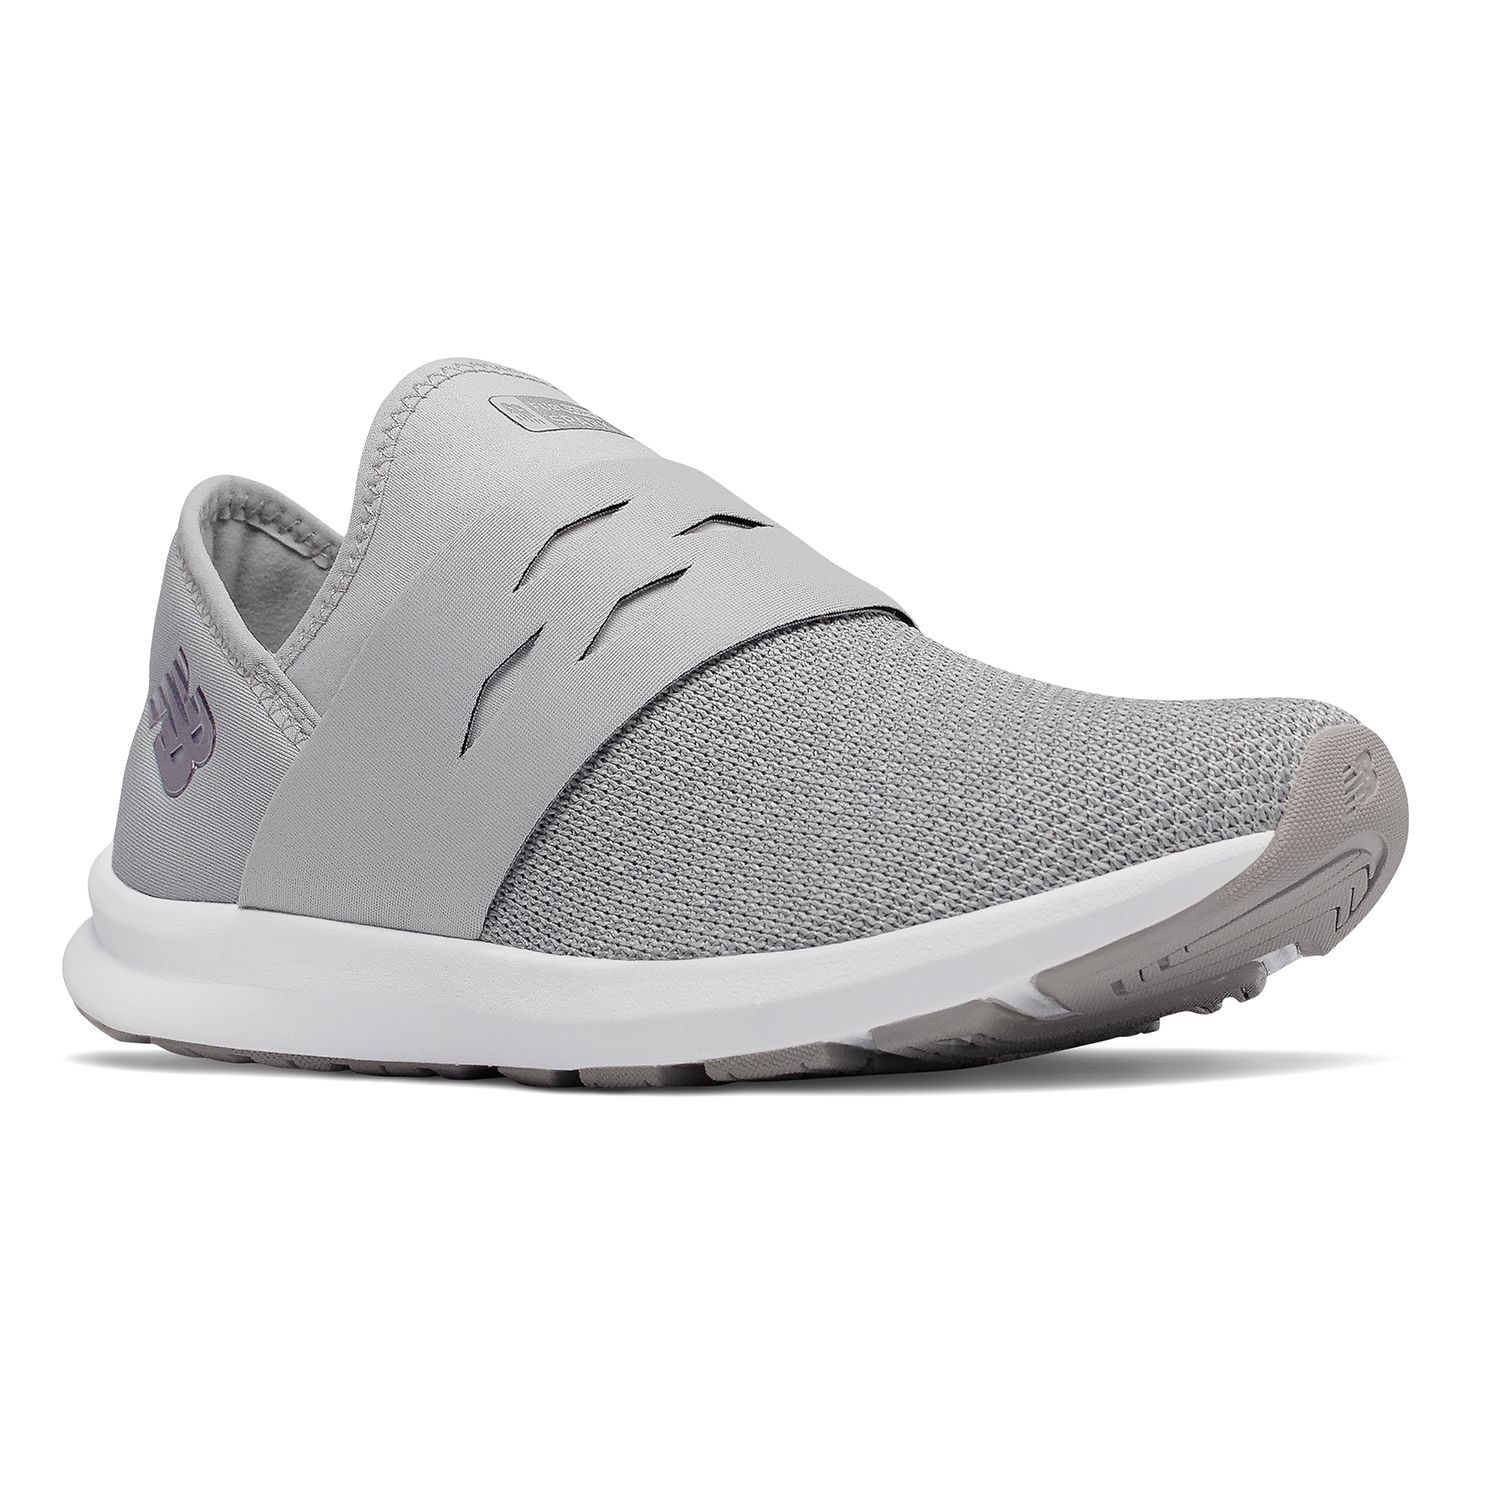 new balance fuelcore spark